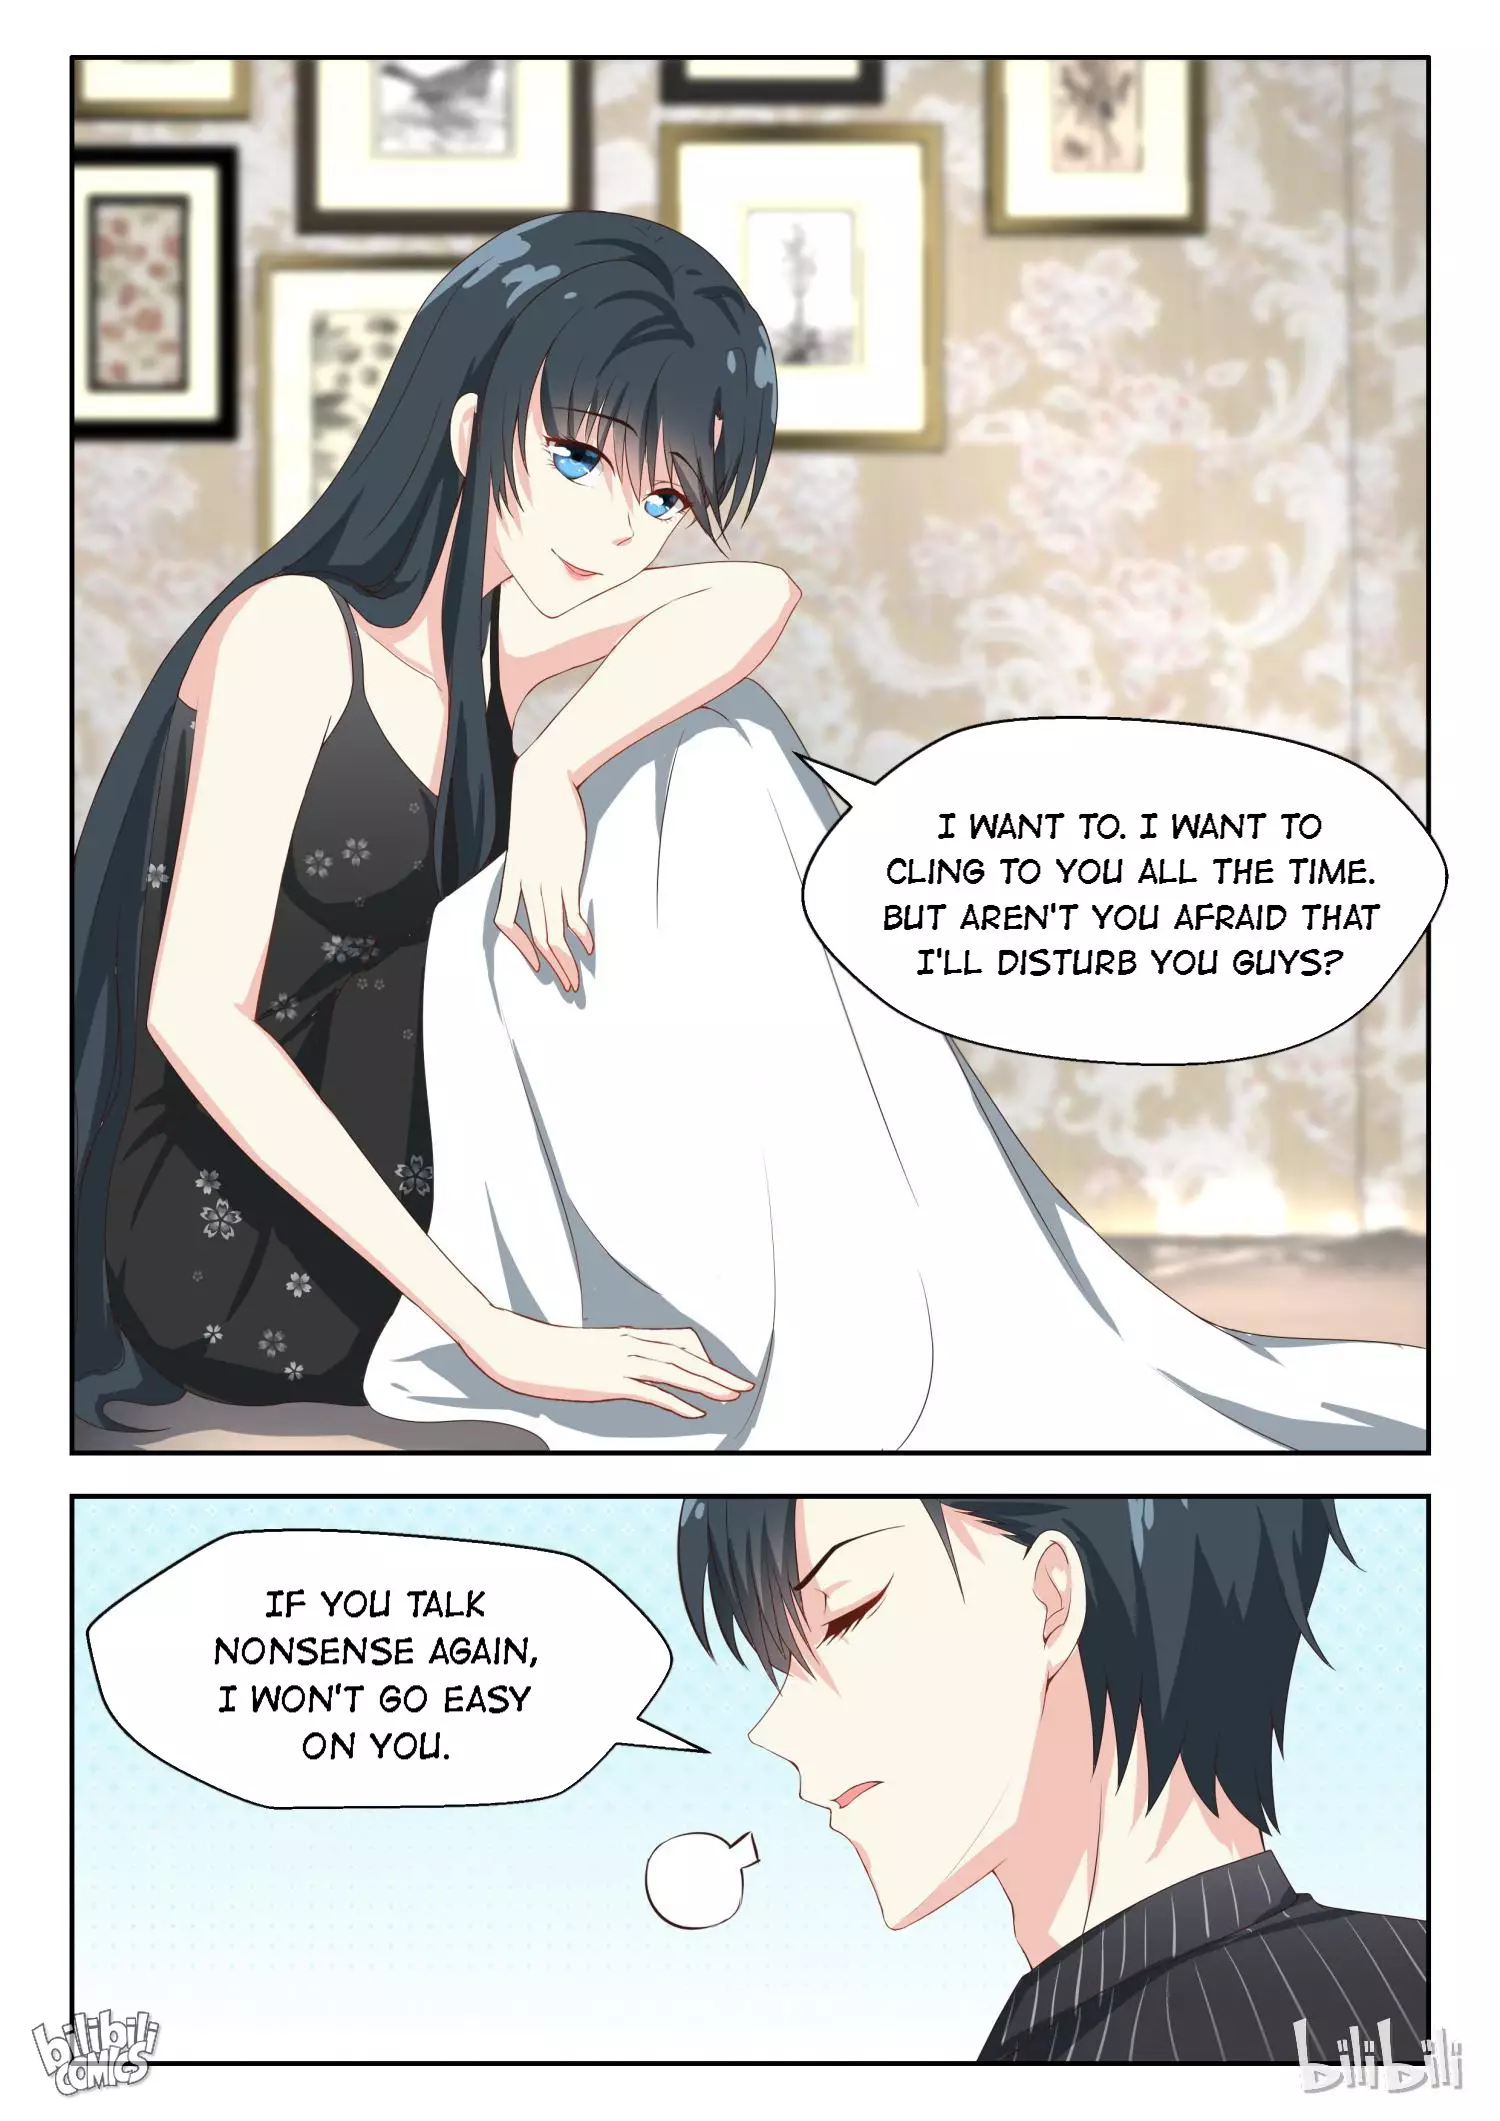 Scheming Marriage - 68 page 7-8dab9336